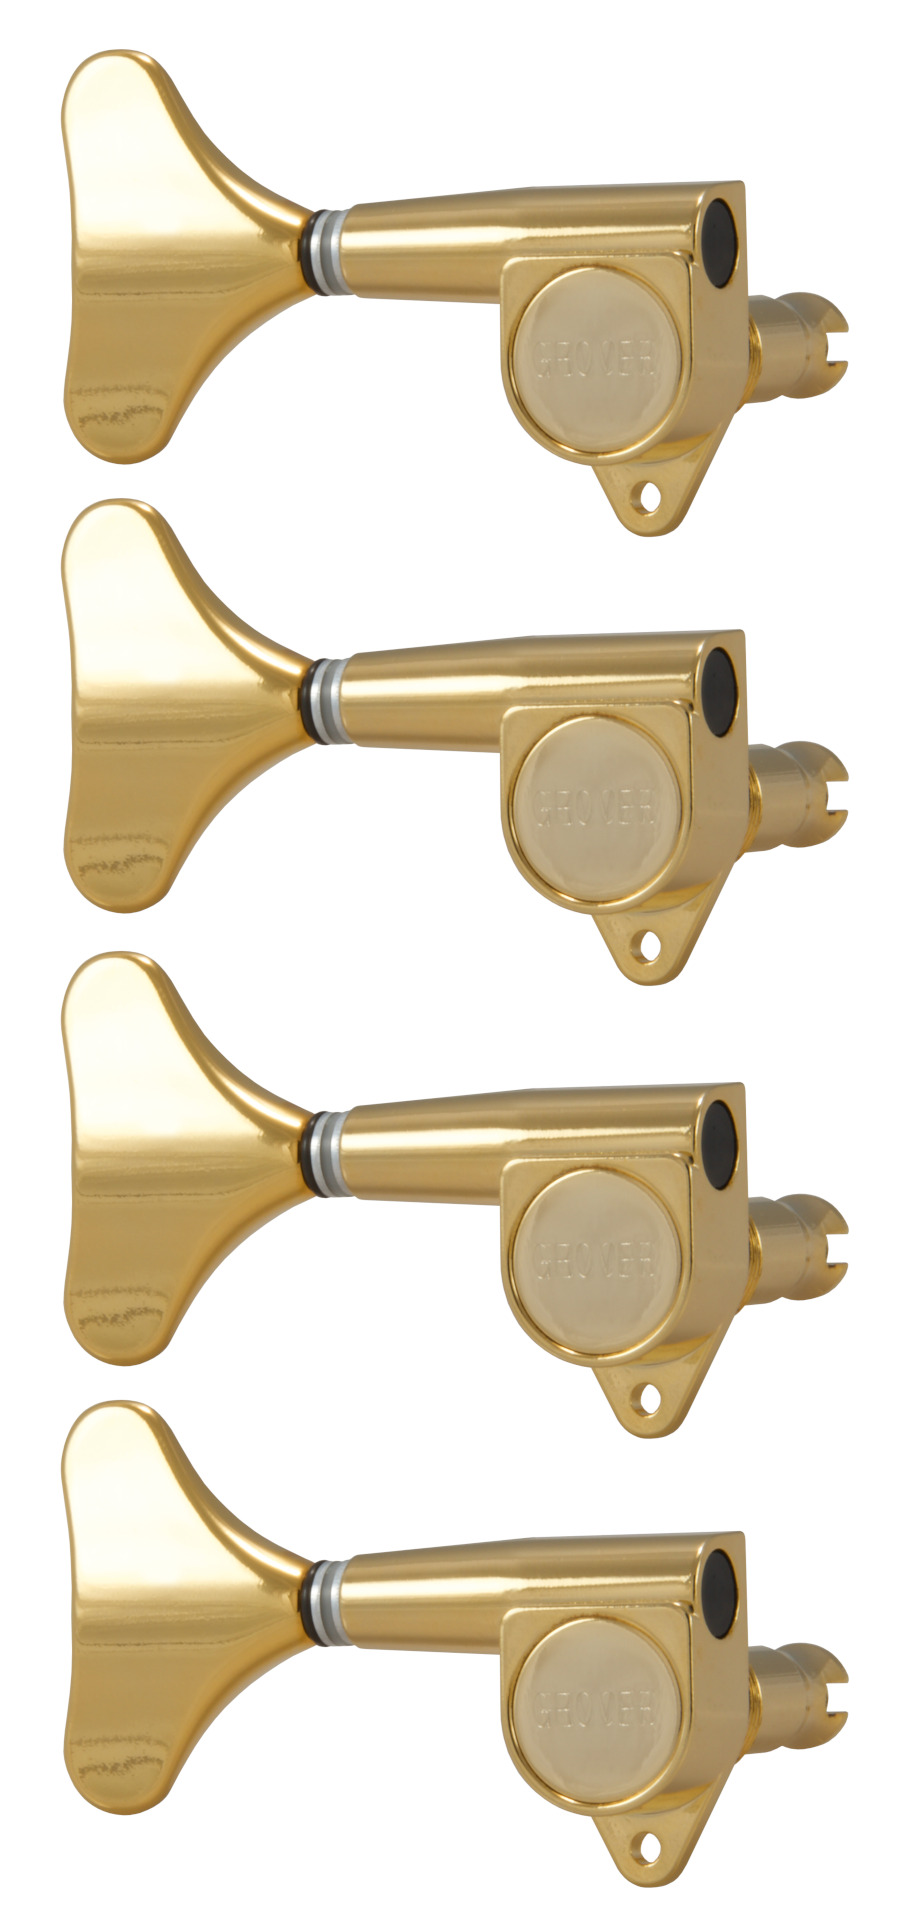 Grover 144GL4 Mini Bass Machines - Bass Machine Heads, 4-in-Line, Lefthand, Treble Side (Right) - Gold